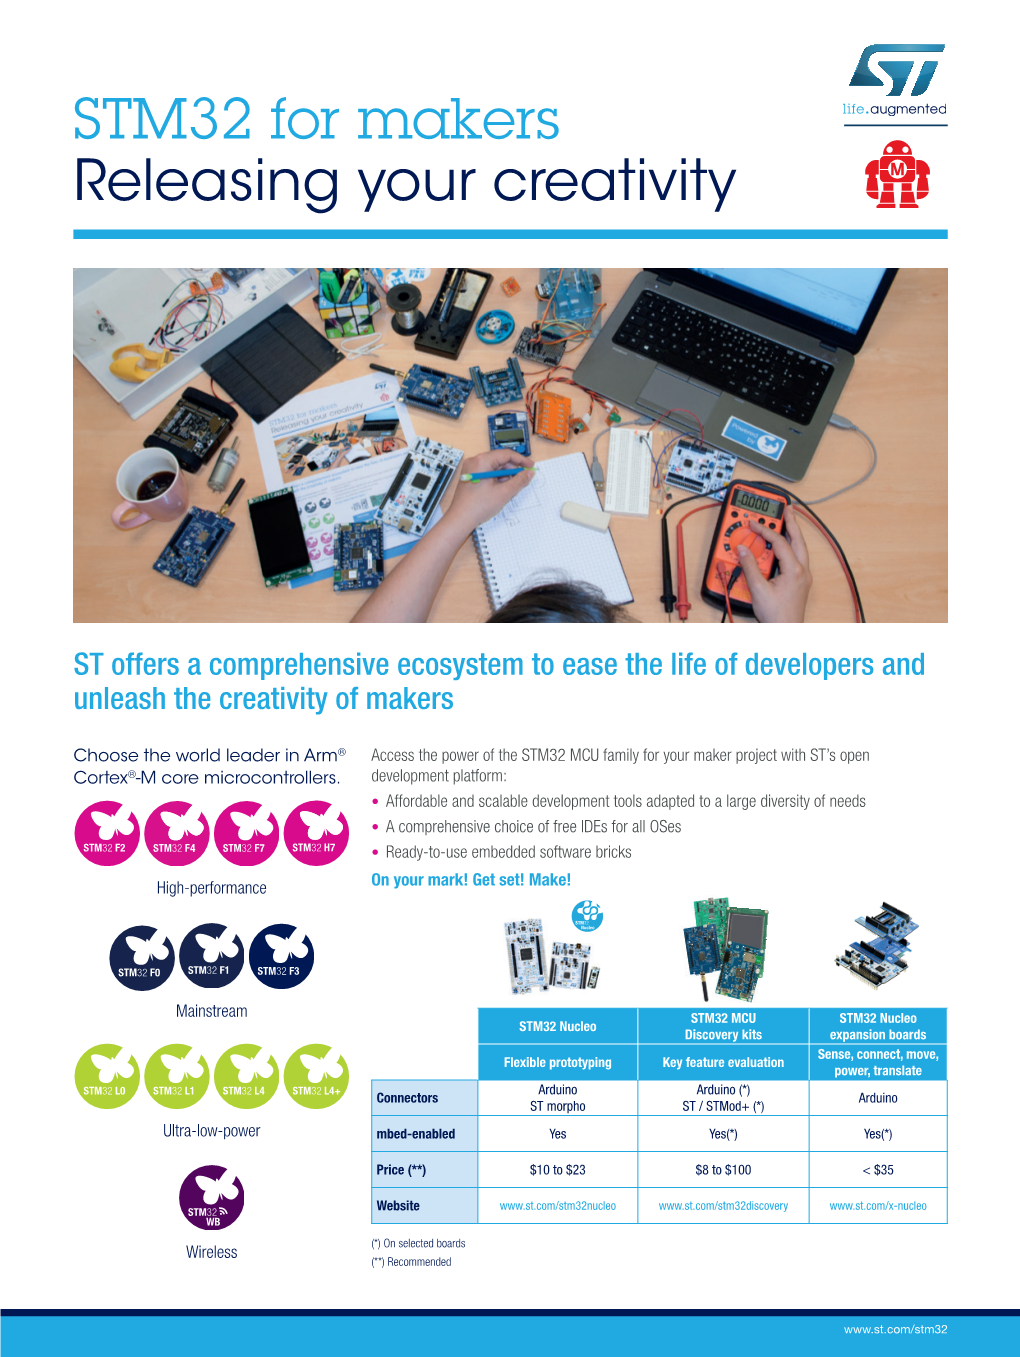 STM32 for Makers Releasing Your Creativity